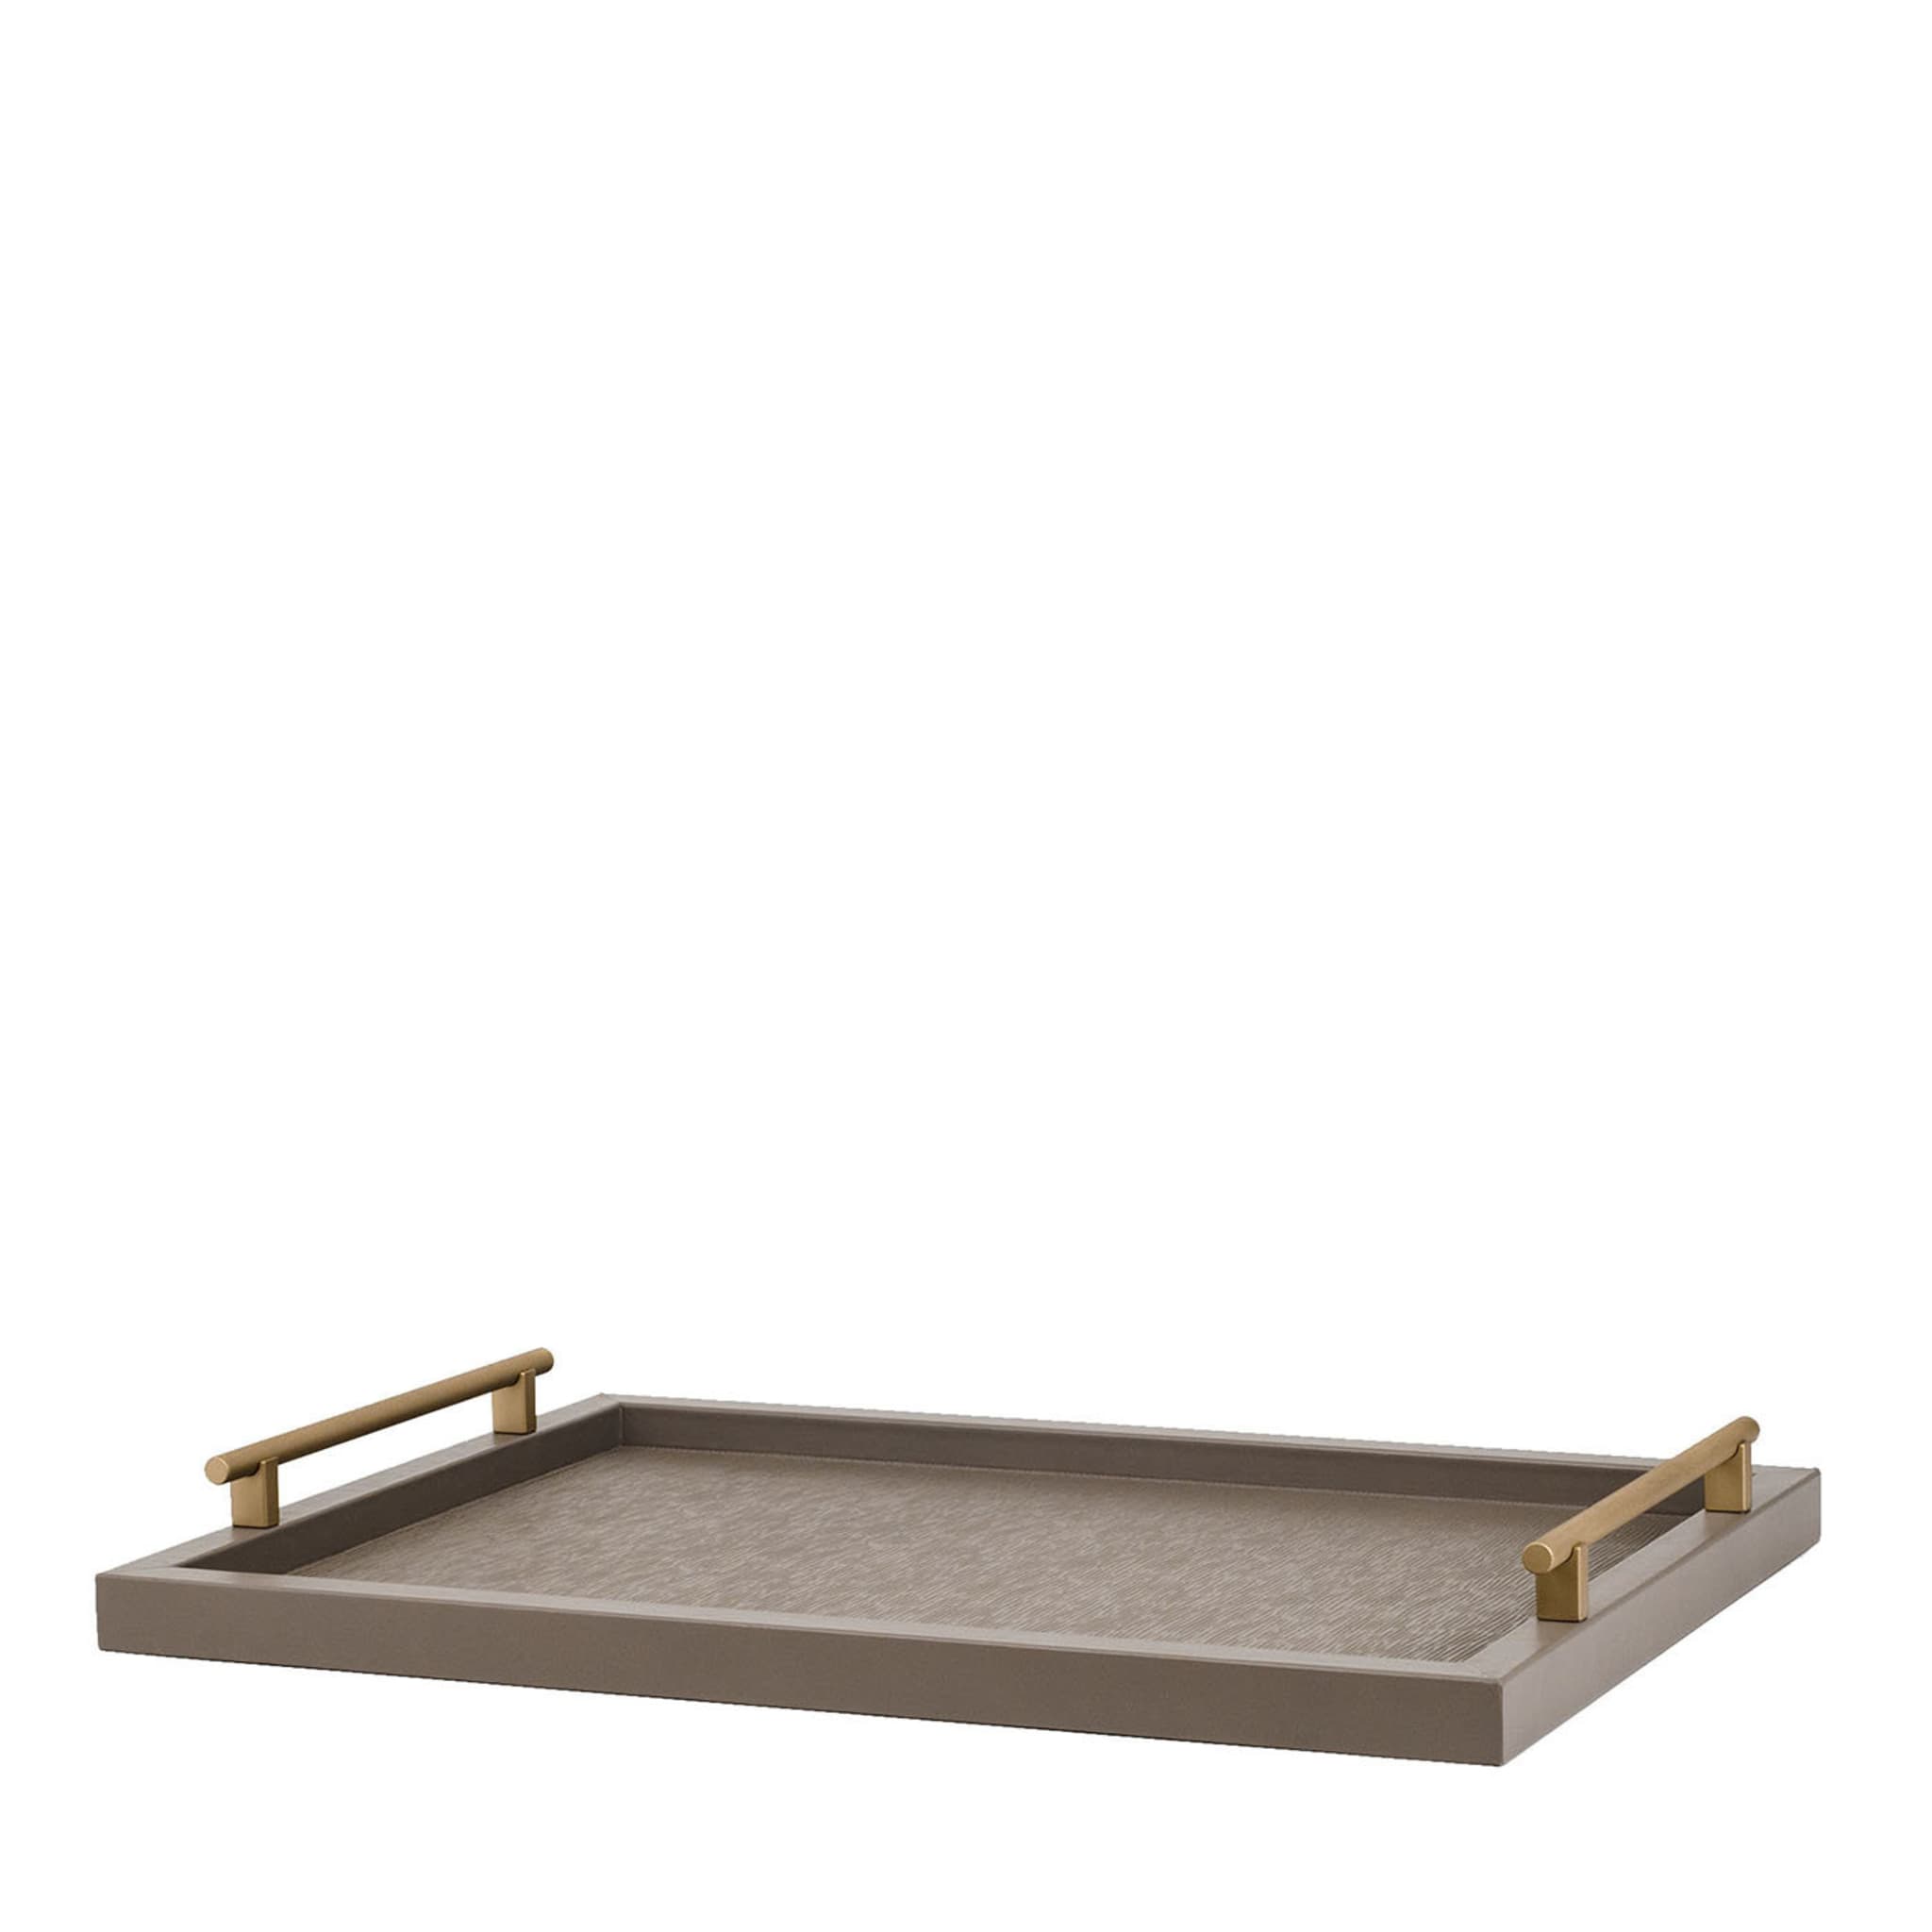 Dafne Large Square Taupe Tray - Main view